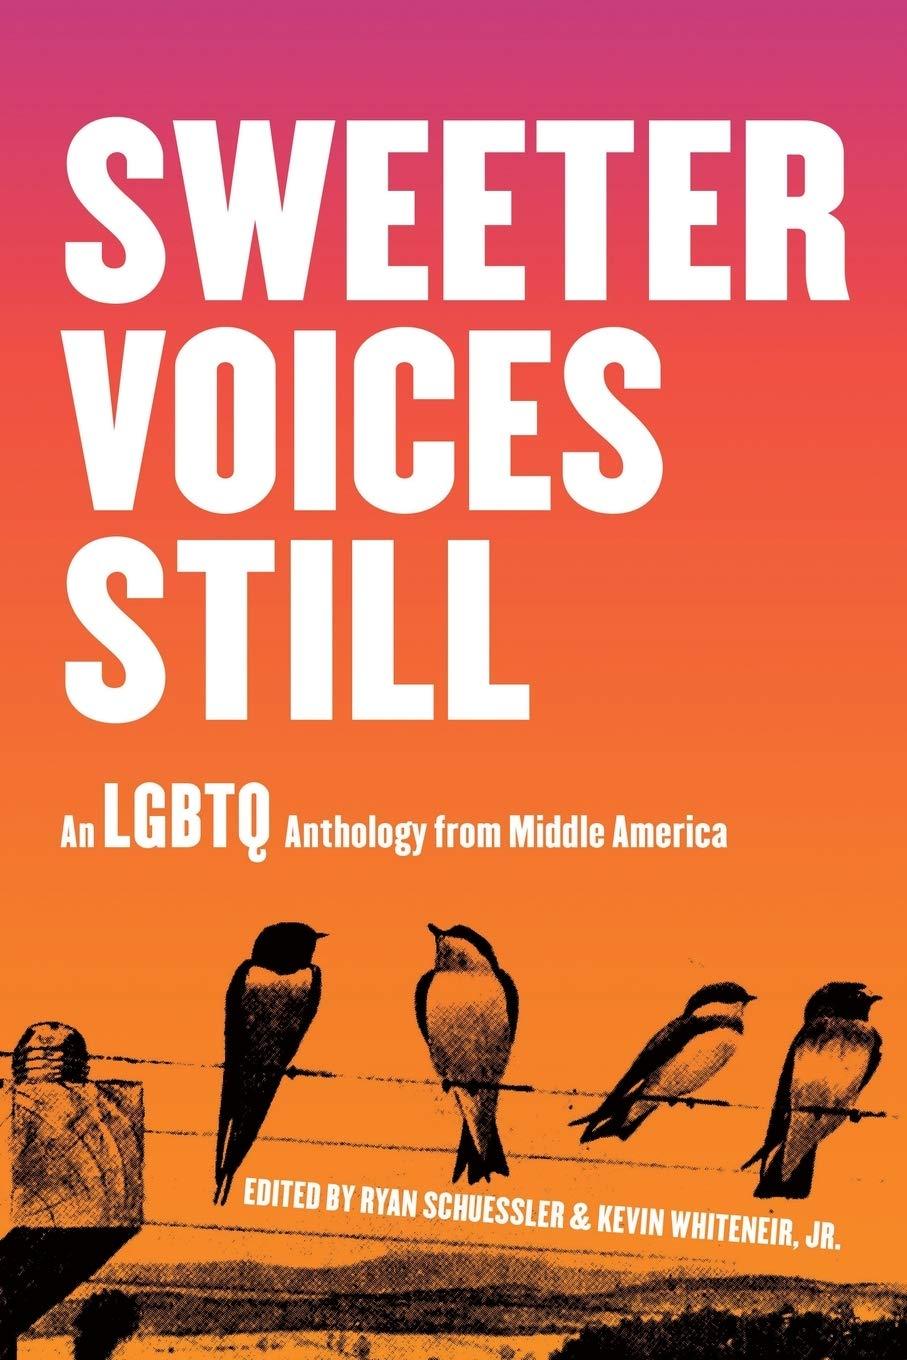 Sweeter Voices Still: An LGBTQ Anthology from Middle America - ShopQueer.co